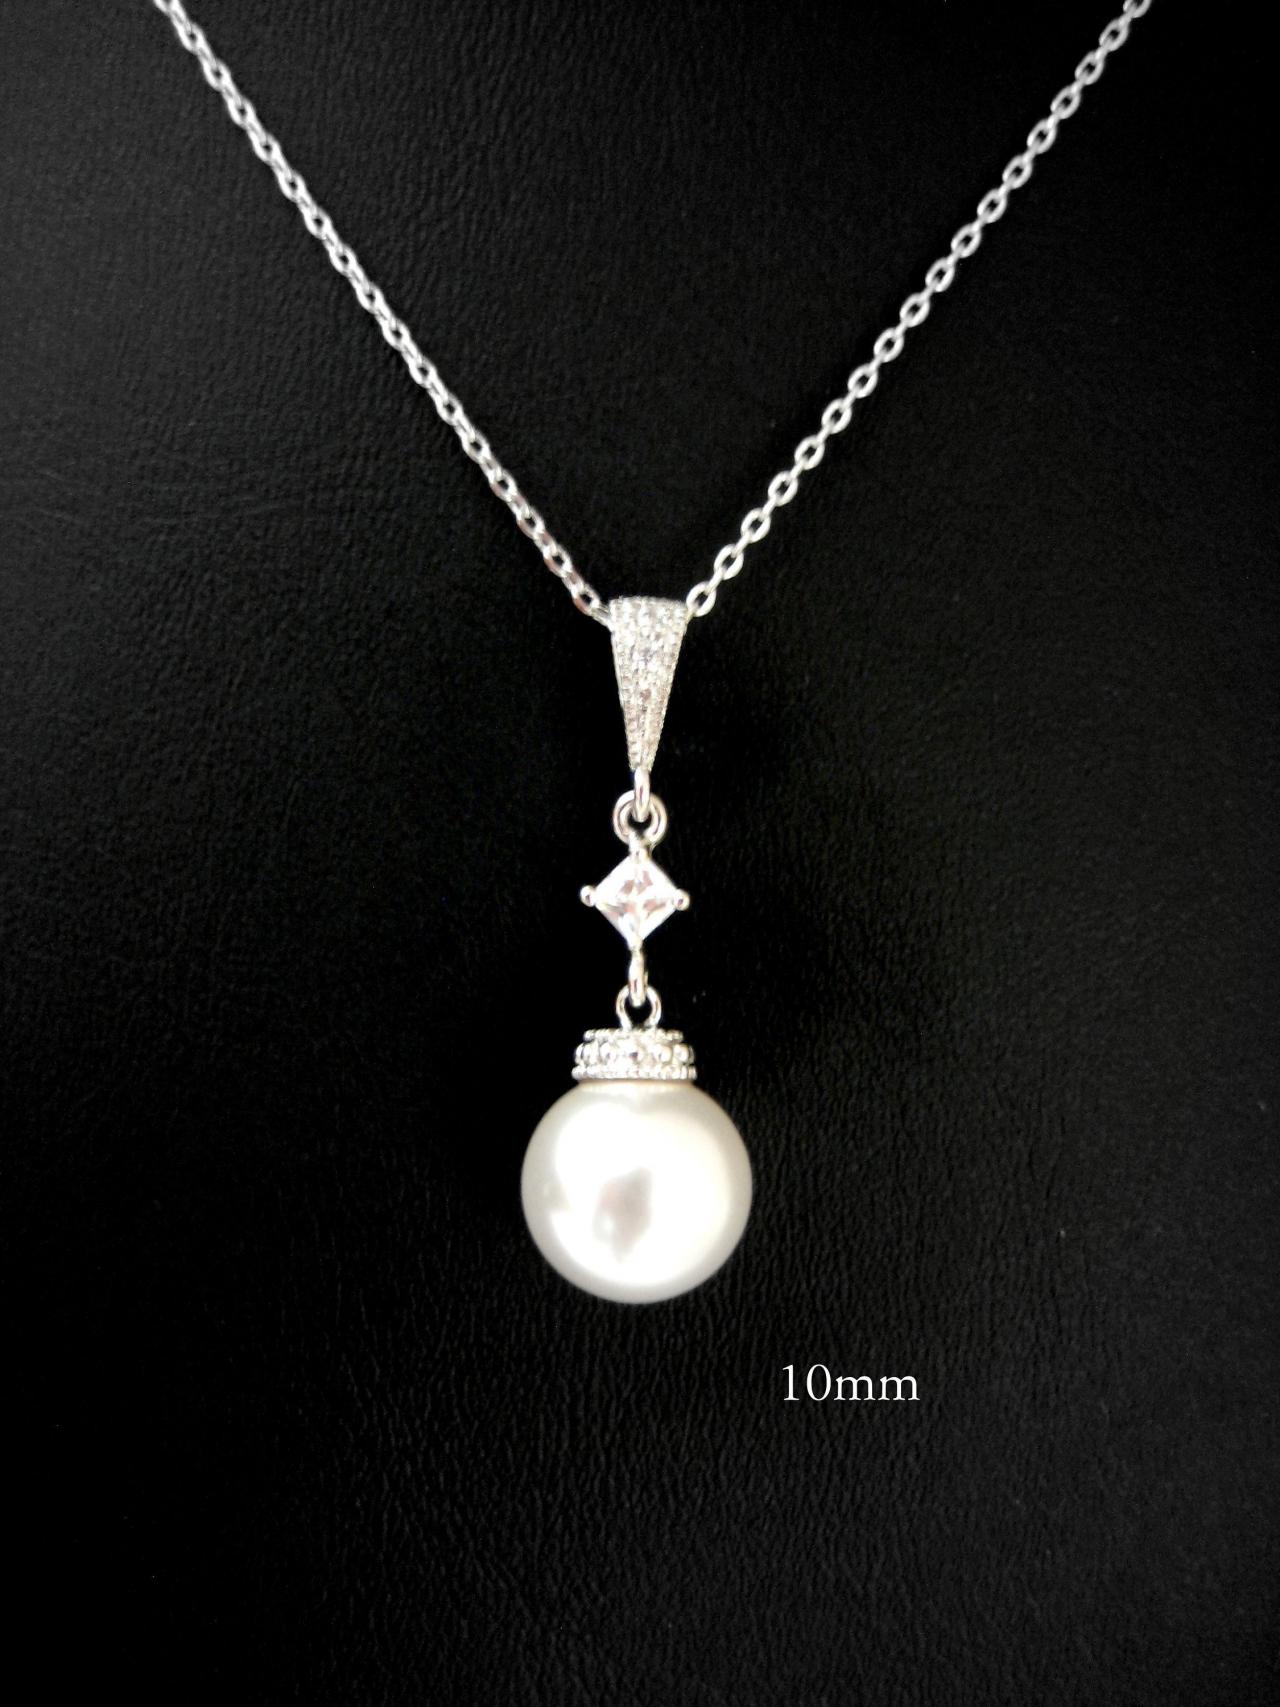 Bridal Pearl Necklace Swarovski 10mm Round Pearl Drop Dangle Necklace Bridesmaid Gift Wedding Jewelry Birthday Gift (n049)